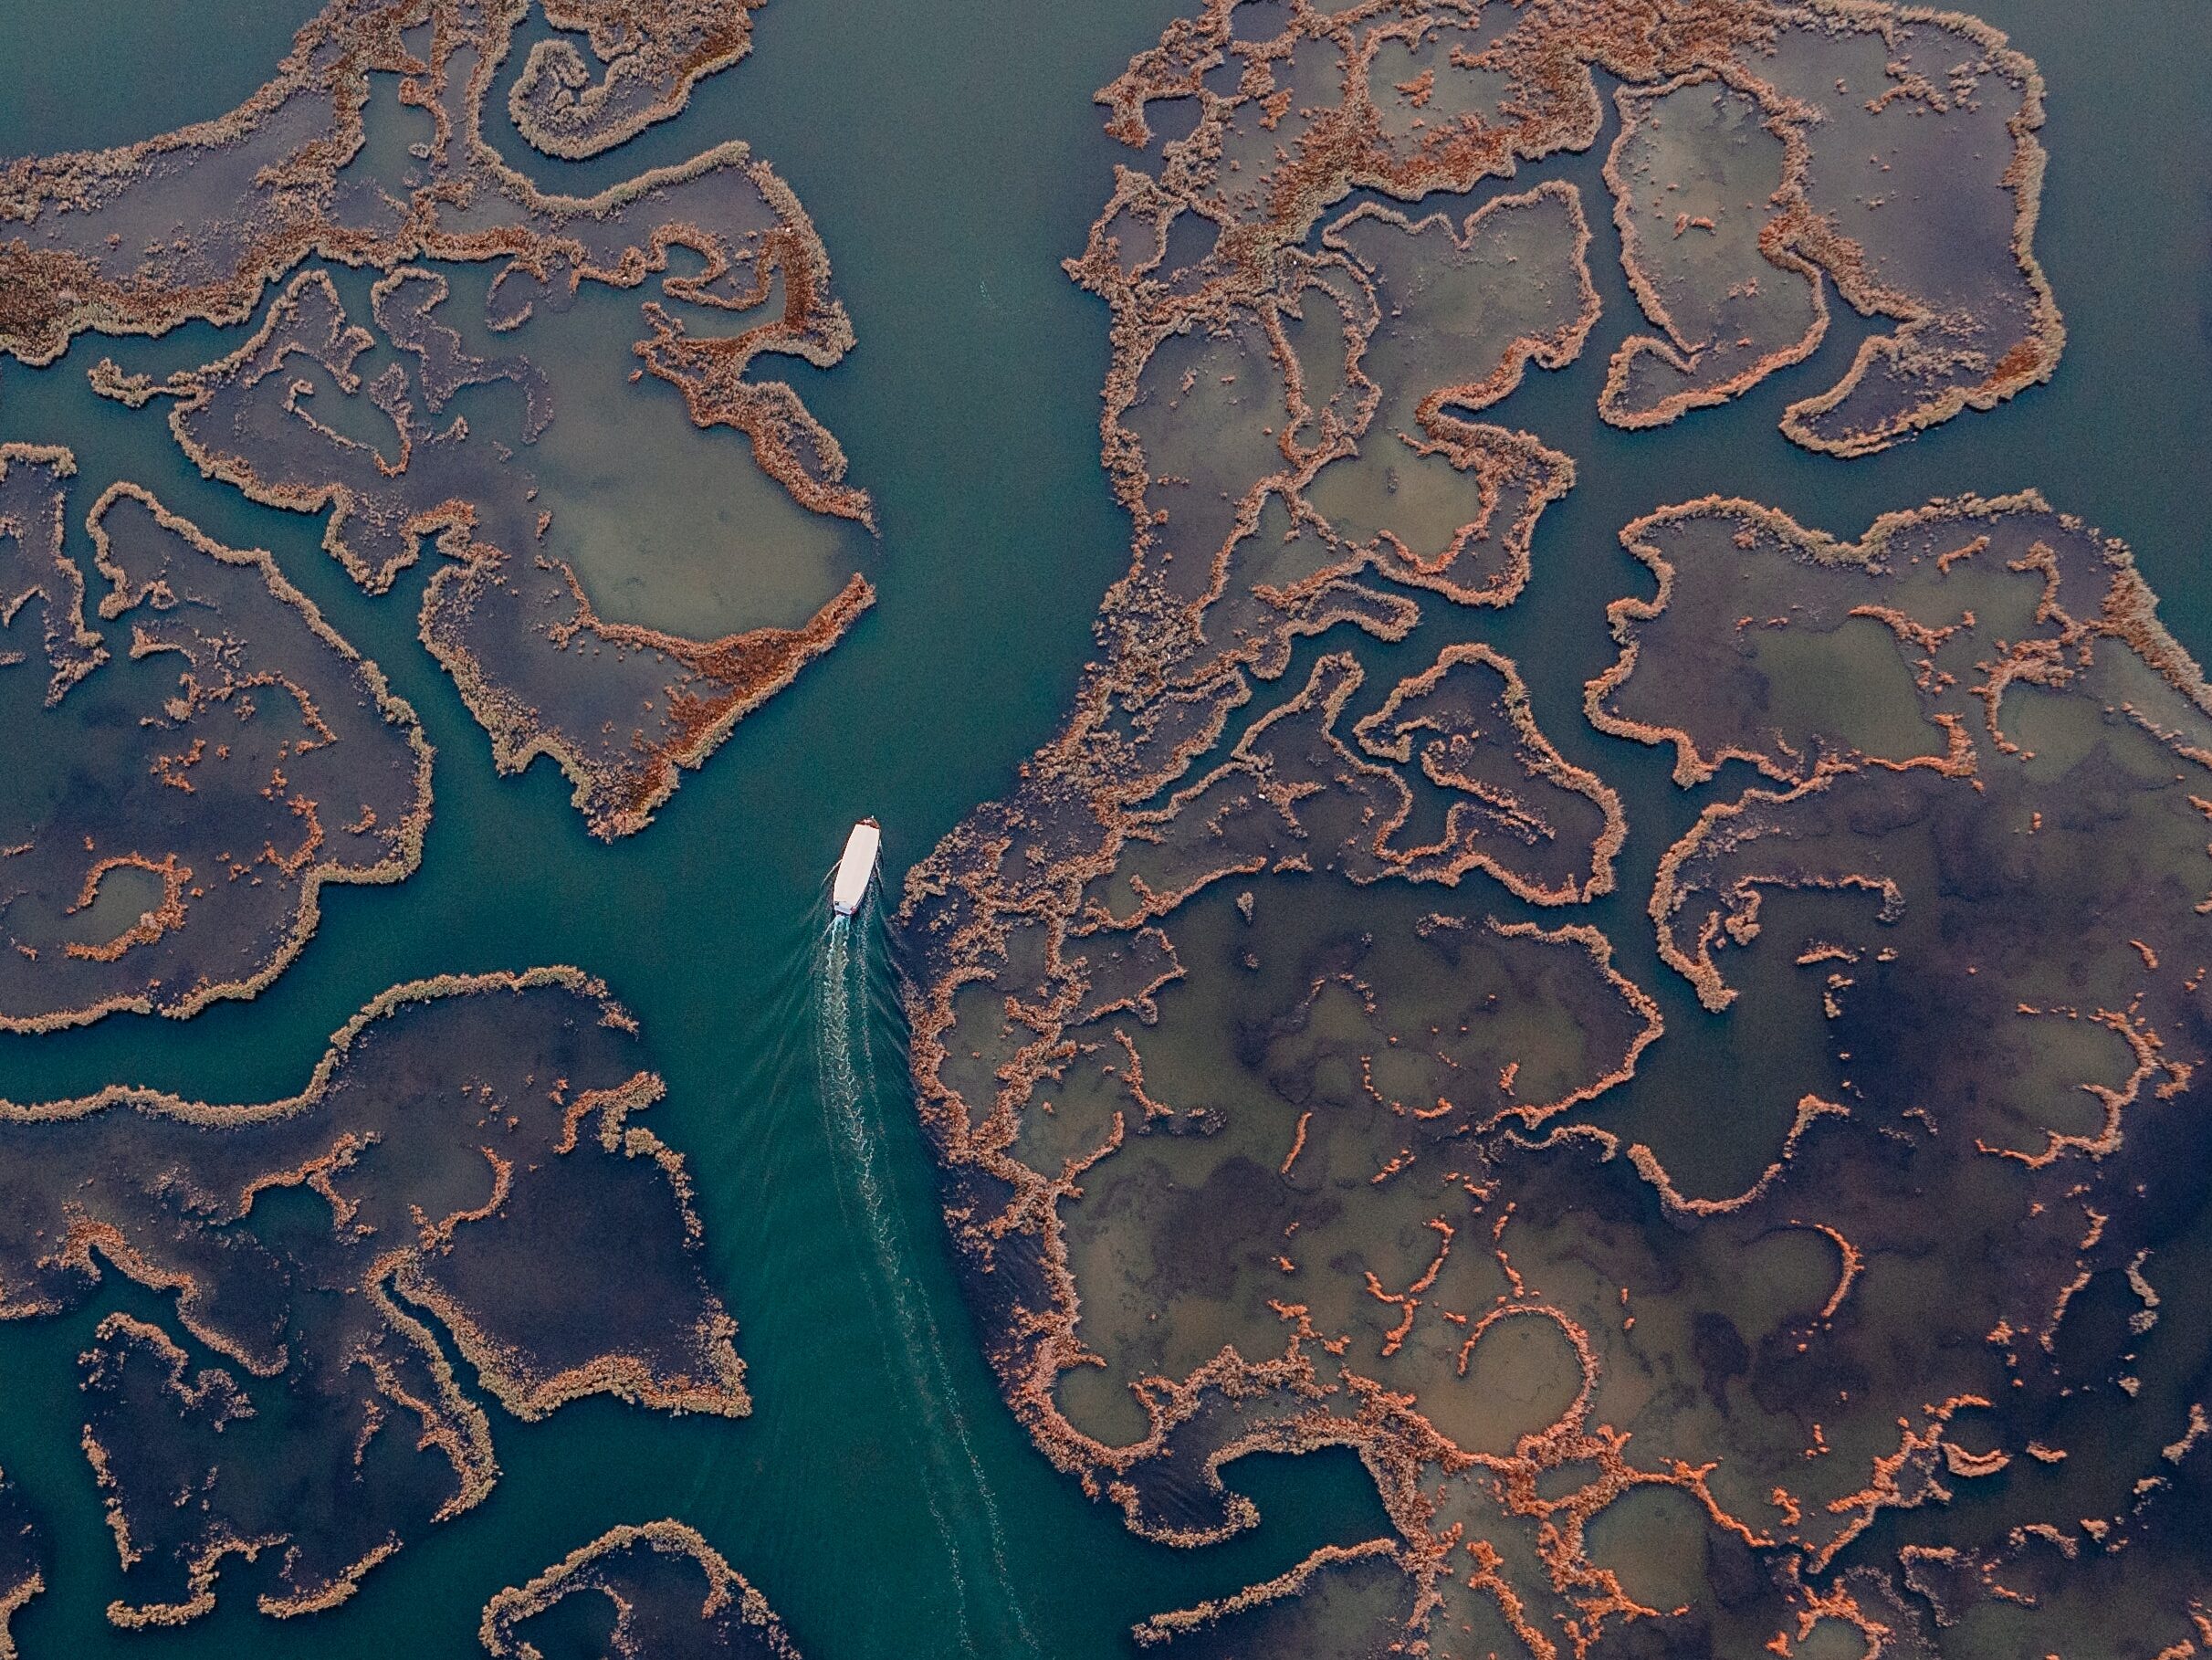 Viewed from overhead, a boat navigates waterways in a delta